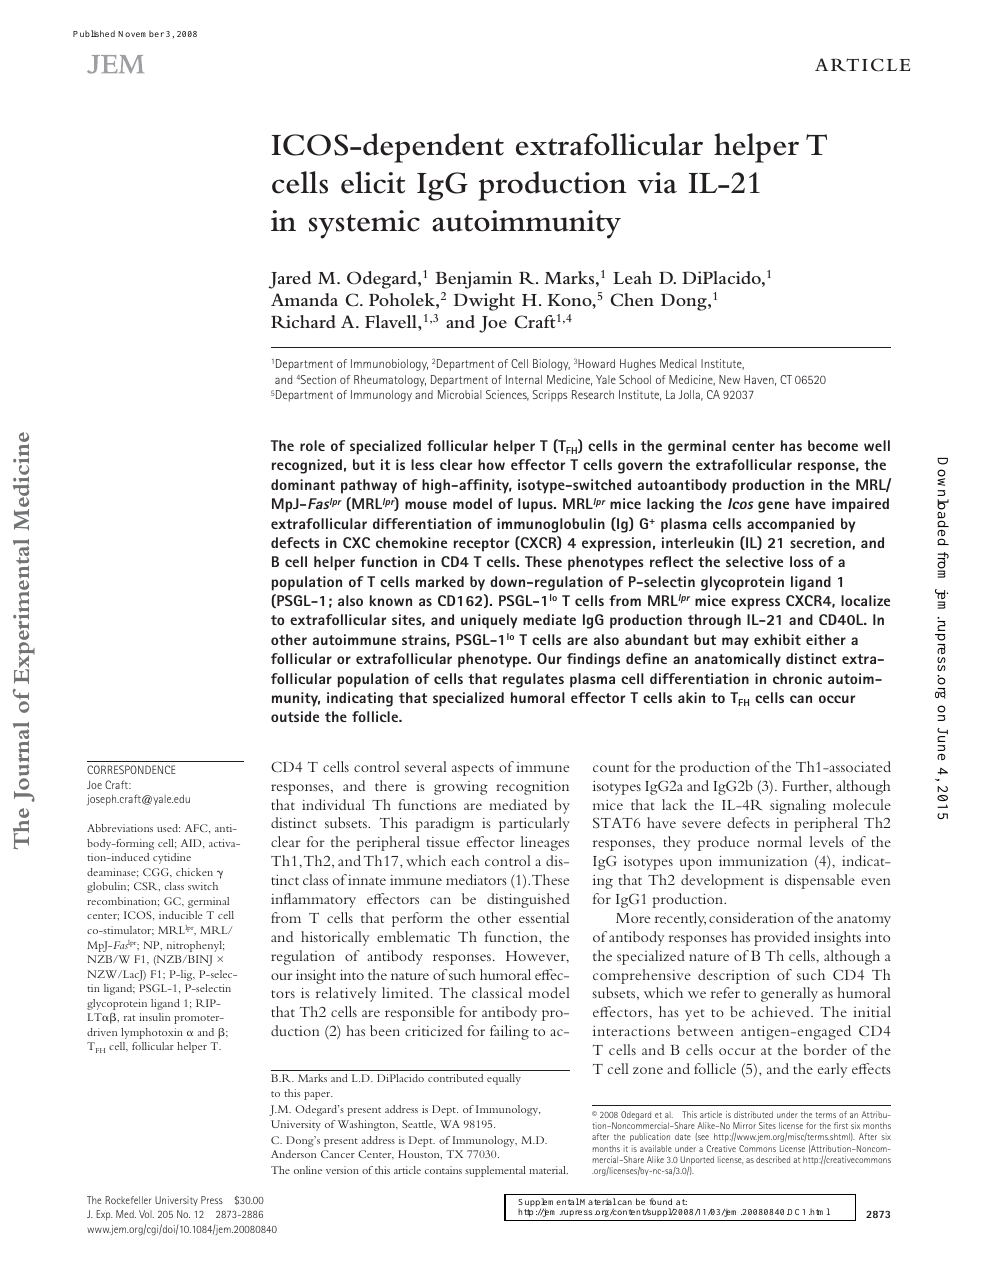 Icos Dependent Extrafollicular Helper T Cells Elicit Igg Production Via Il 21 In Systemic Autoimmunity Topic Of Research Paper In Biological Sciences Download Scholarly Article Pdf And Read For Free On Cyberleninka Open